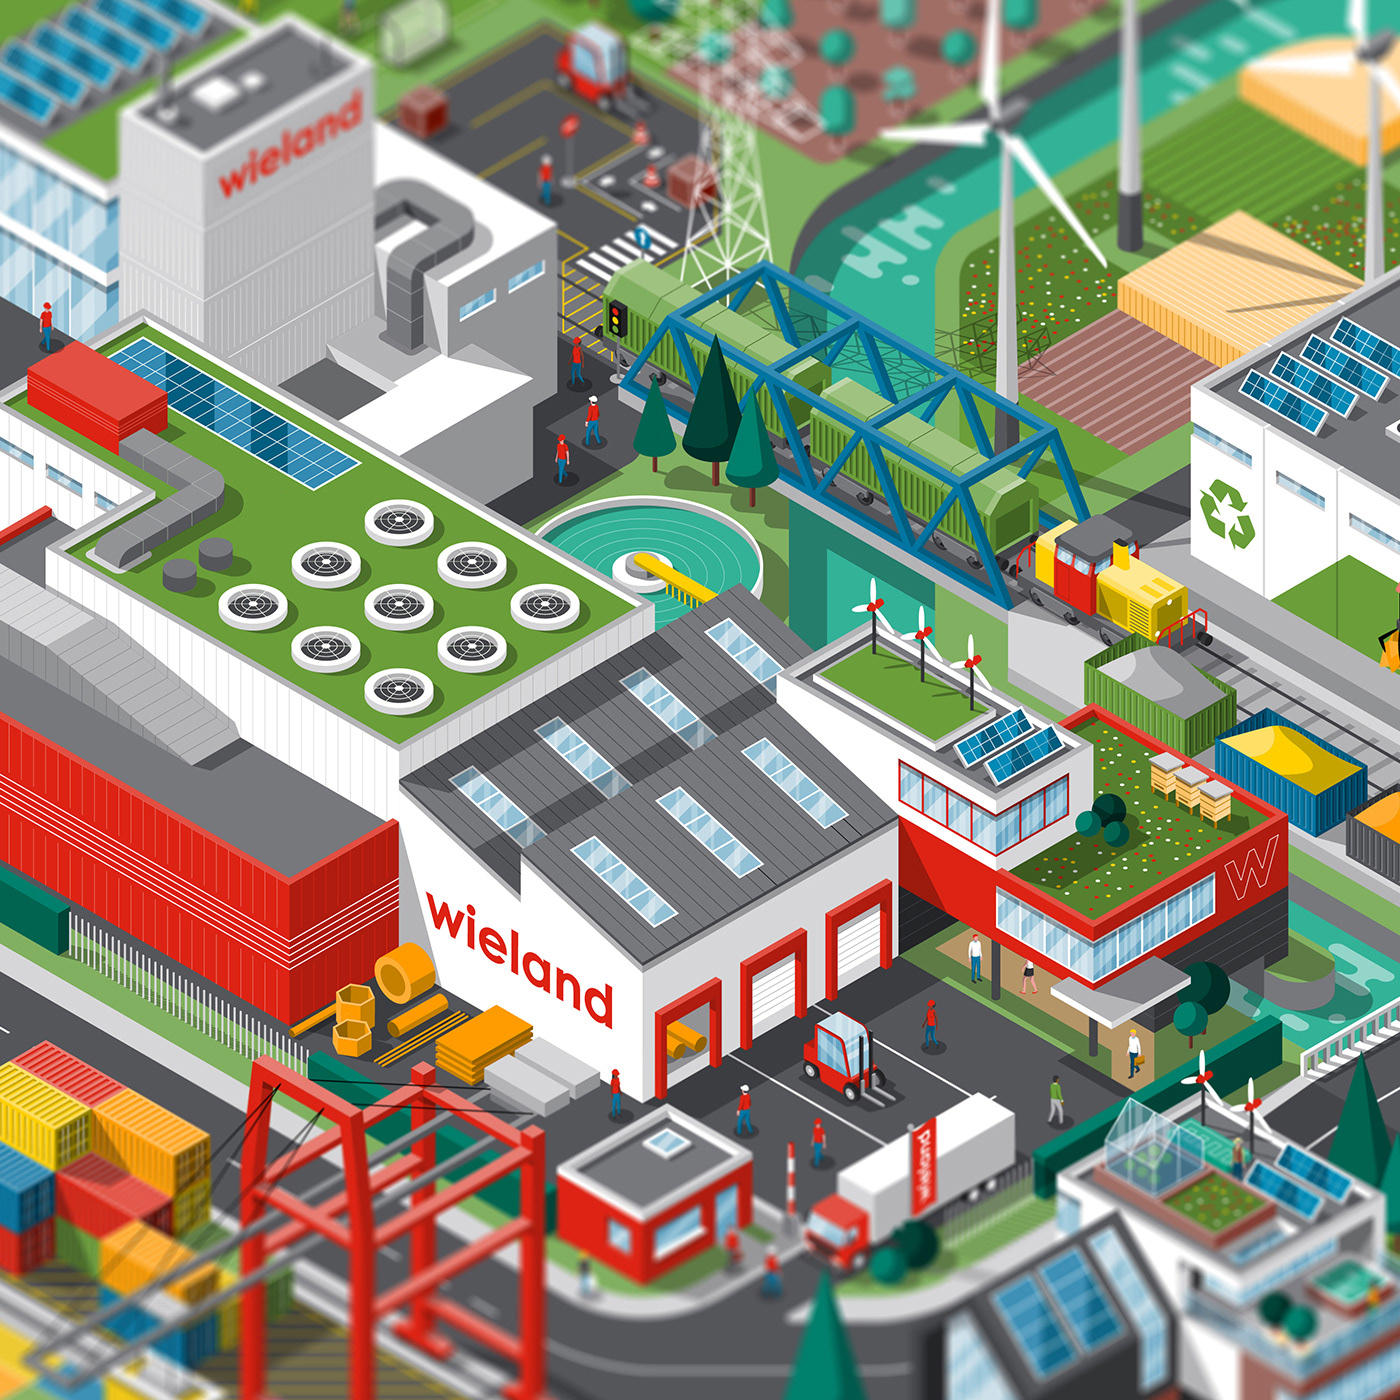 Isometric illustration for sustainability report or copper producer Wieland by Adrian Bauer